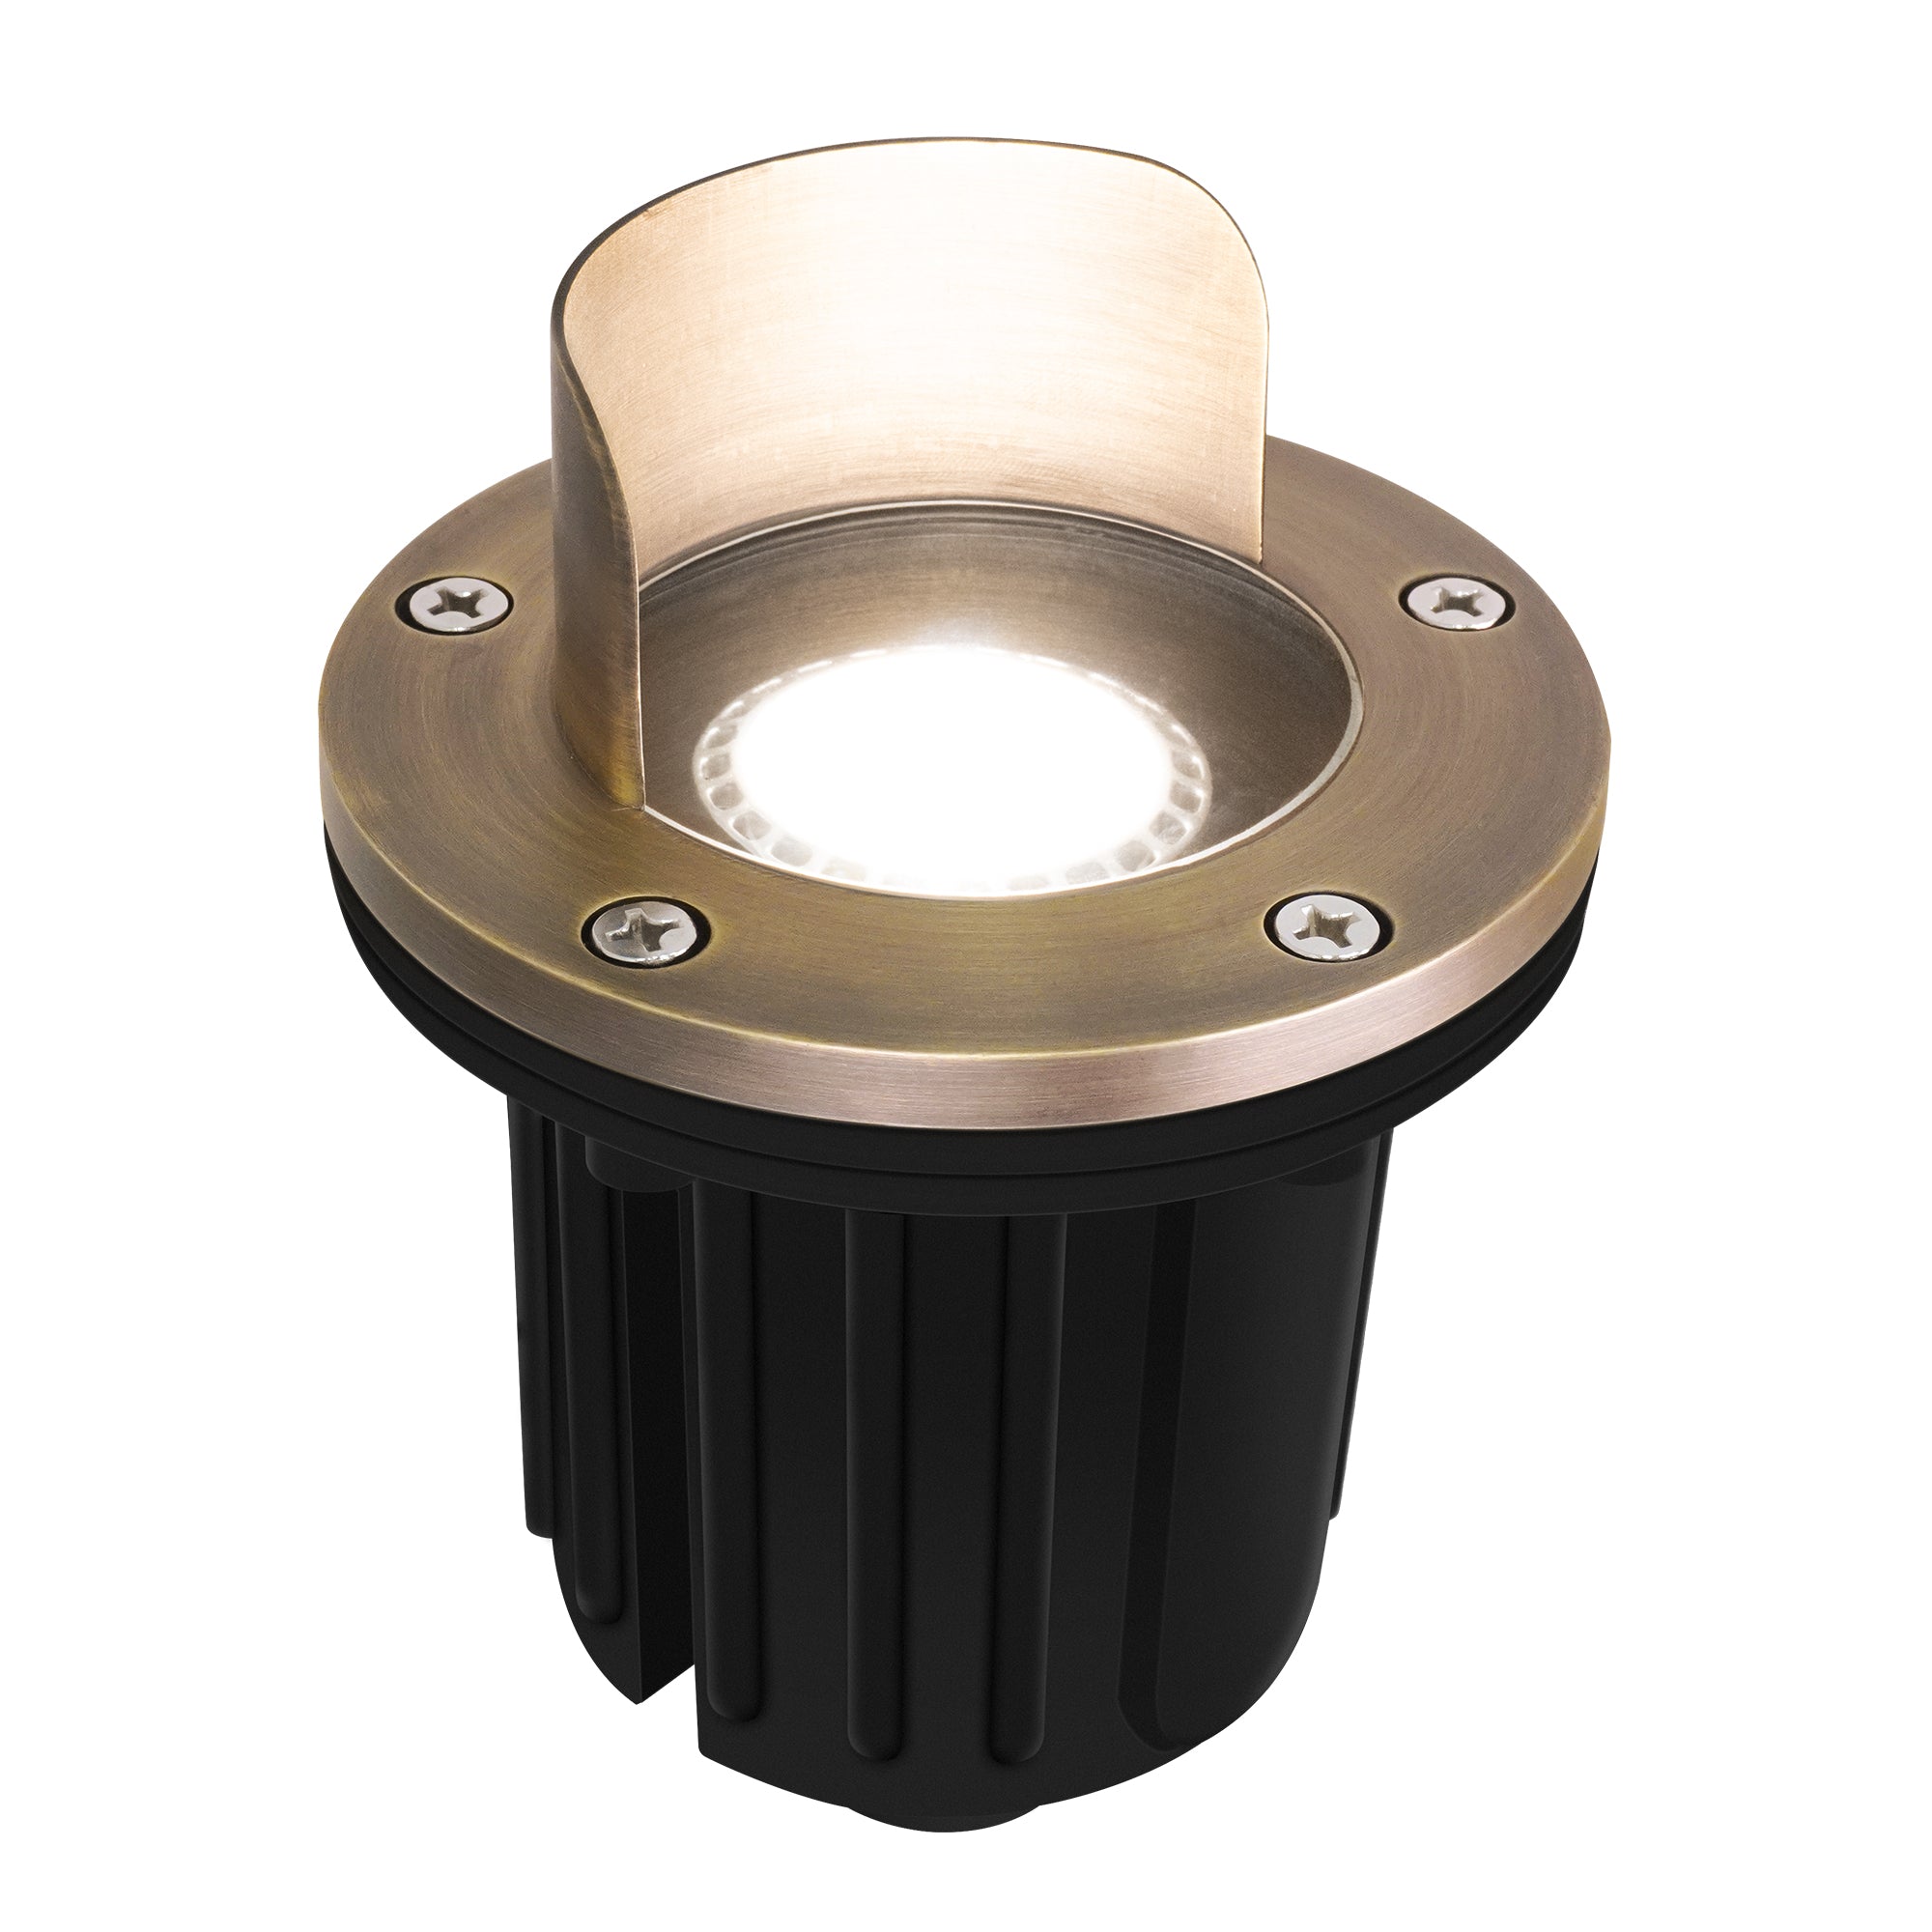 Low Voltage Brass Shield Top Well Light, 12V AC/DC, 5W, IP67 Rated, 370Lm, 2700K (MR16)